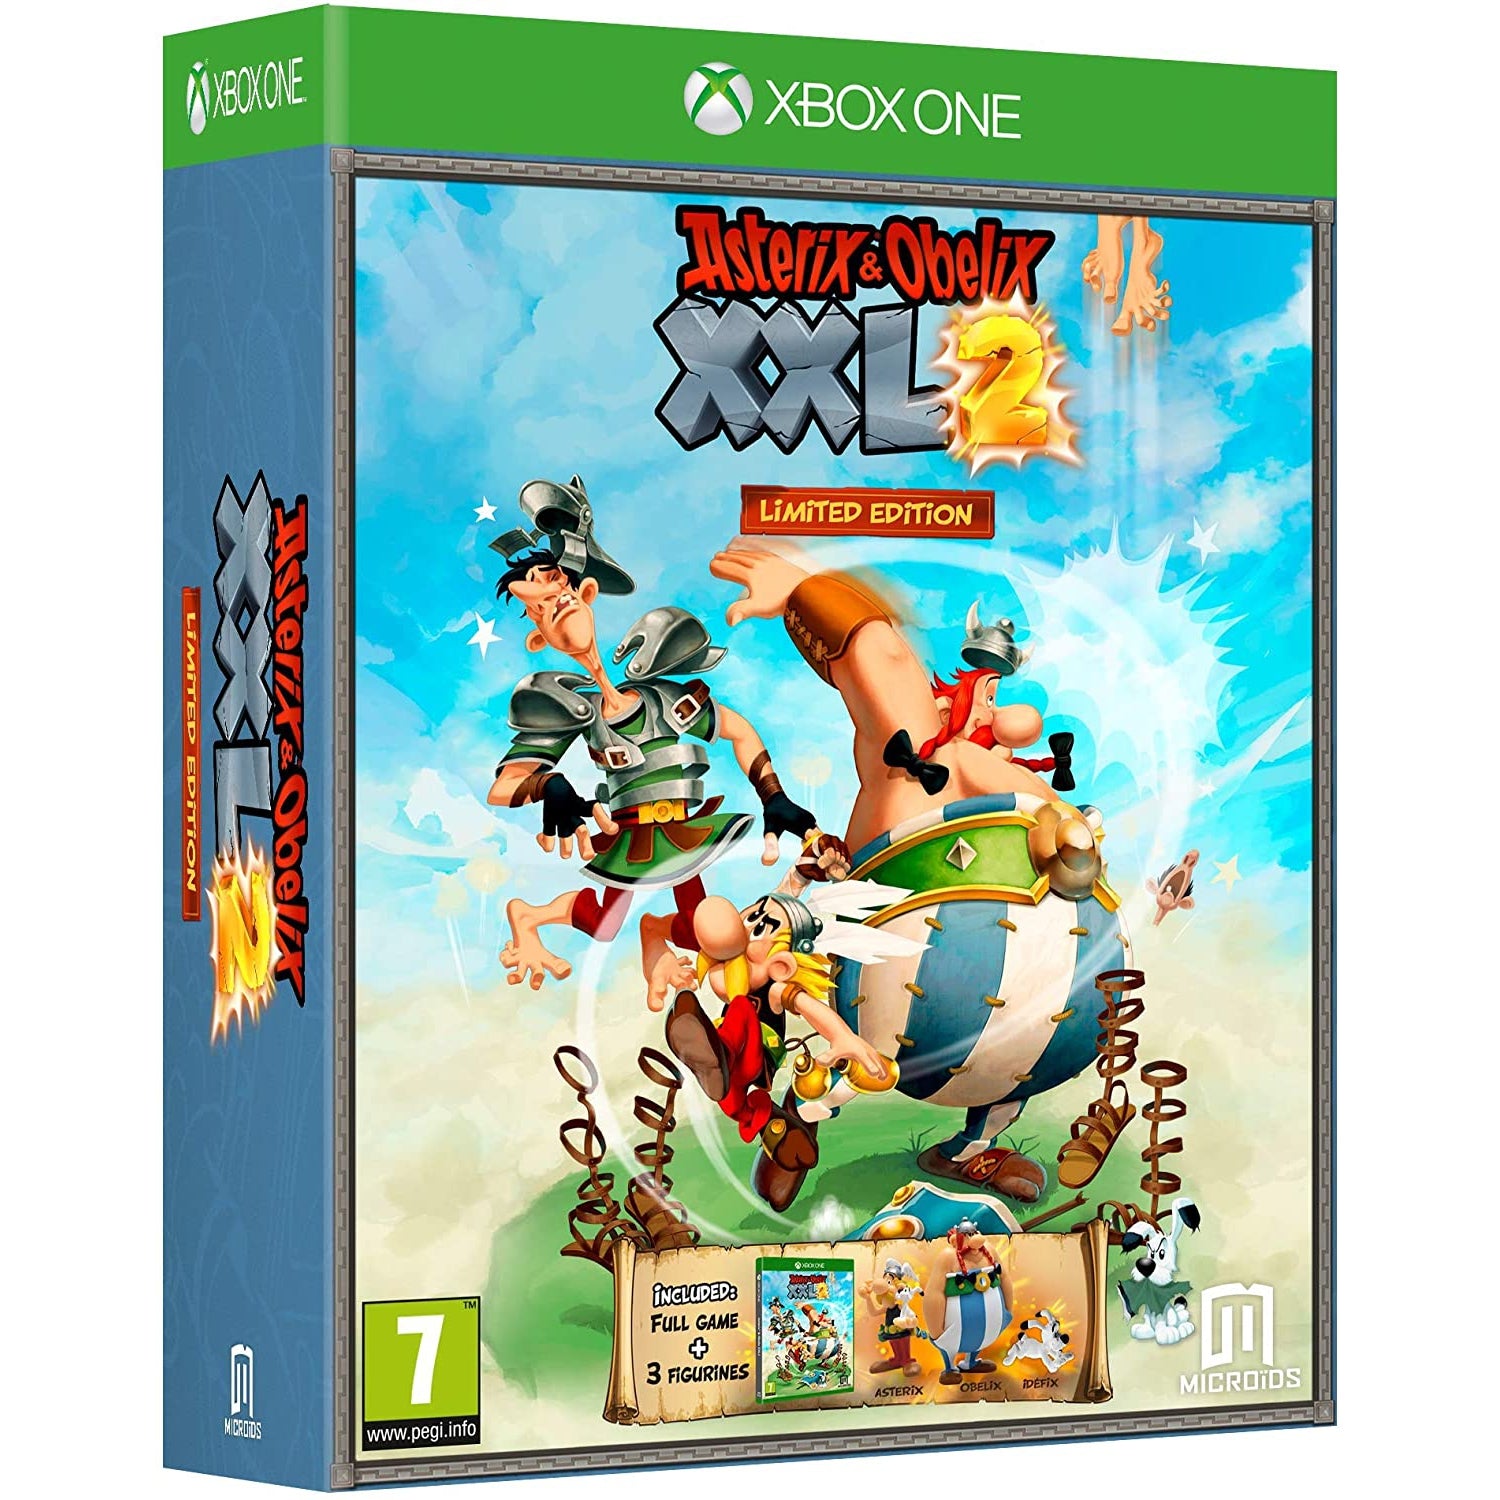 Asterix & Obelix XXL2 Limited Edition (Xbox One)